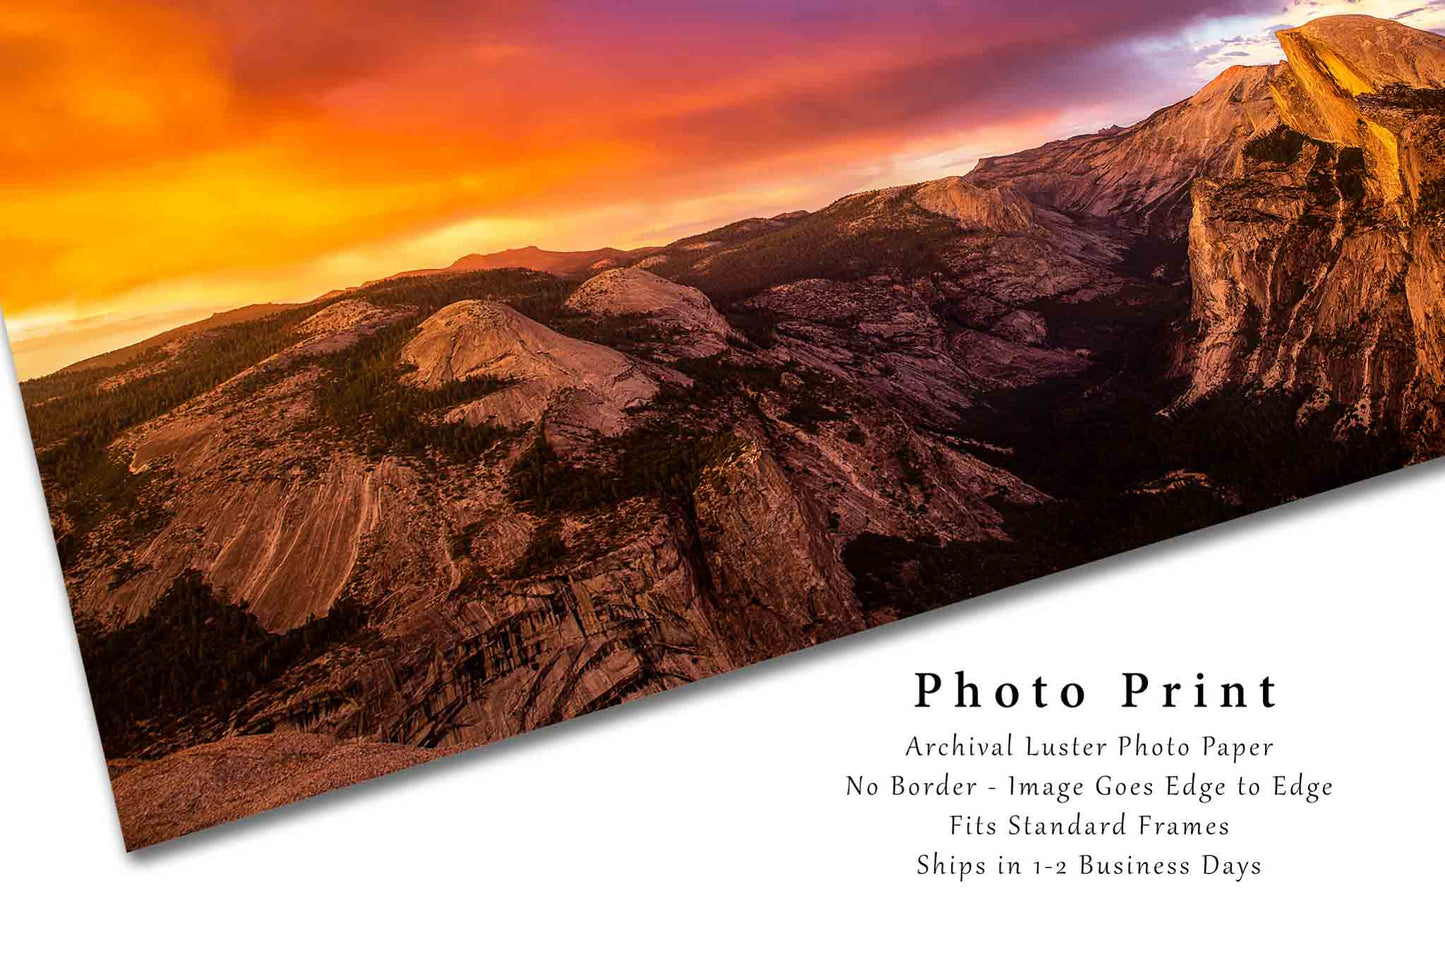 Yosemite Photography Print - Picture of Colorful Clouds Over Half Dome at Sunset in California - Sierra Nevada Landscape Photo Artwork Decor